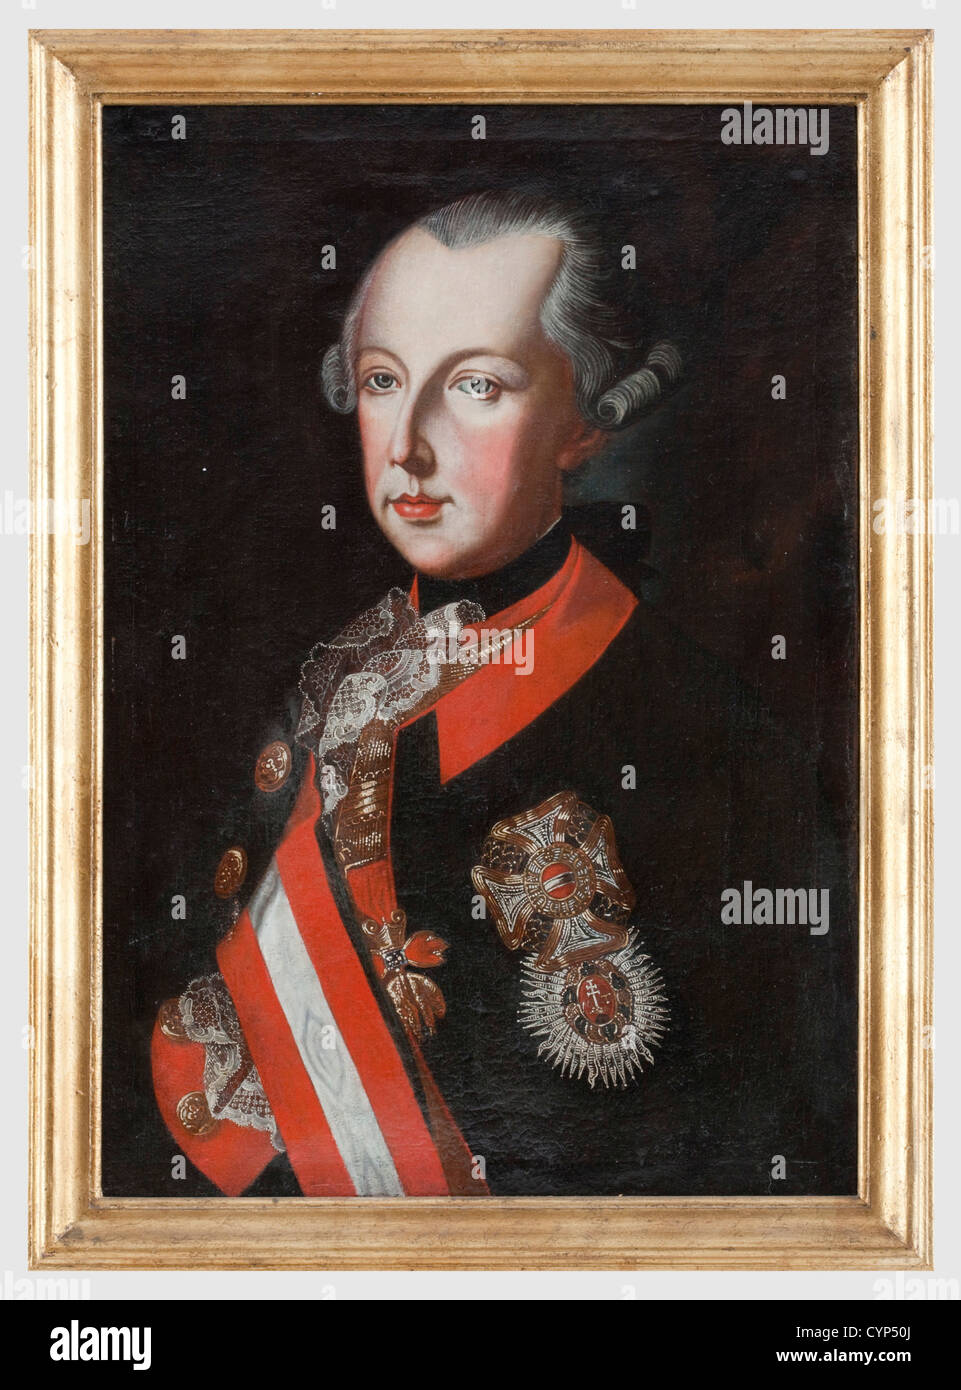 Kaiser Joseph II of Austria (1741 - 1790) - a bust portrait in uniform, circa 1765. Oil on canvas. Contemporary office portrait of the Kaiser in uniform with the Order of the Golden Fleece, the Military Order of Maria Theresia and the Order of Saint Stephen. Dimensions 64 x 44 cm, unsigned. Small, restorable tear and old mended tear. Newer frame, people, 18th century, Imperial, Austria, Austrian, Danube Monarchy, Empire, object, objects, stills, clipping, clippings, cut out, cut-out, cut-outs, painting, paintings, picture, pictures, illustrations, fine arts, ar, Stock Photo